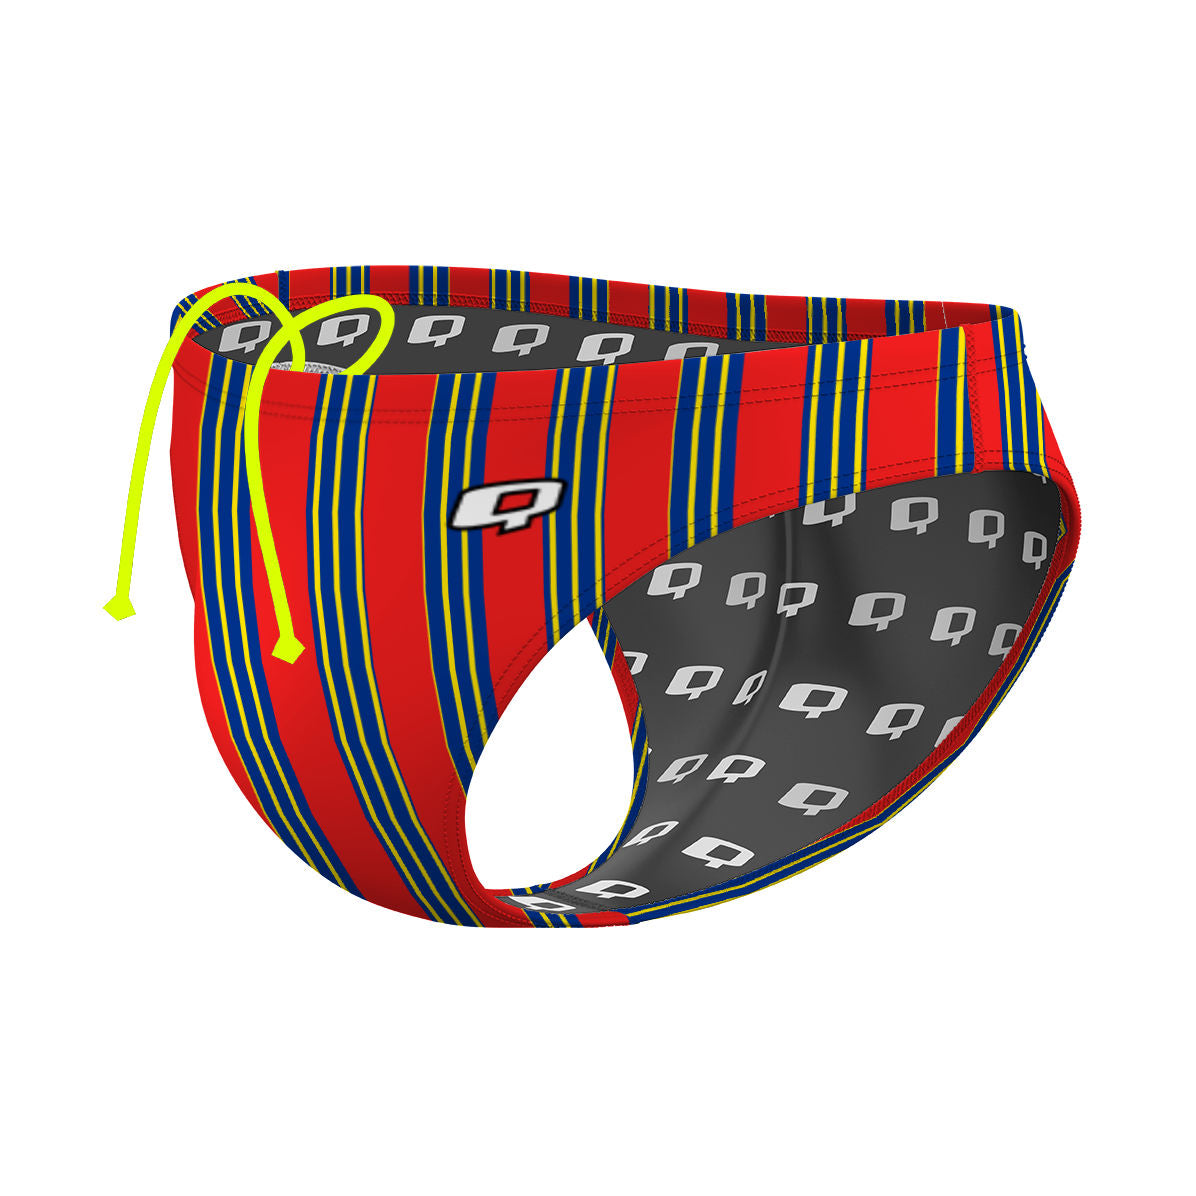 Royal Stripes V1 Red Horizontal 180 Yellow - Waterpolo Brief Swimsuit